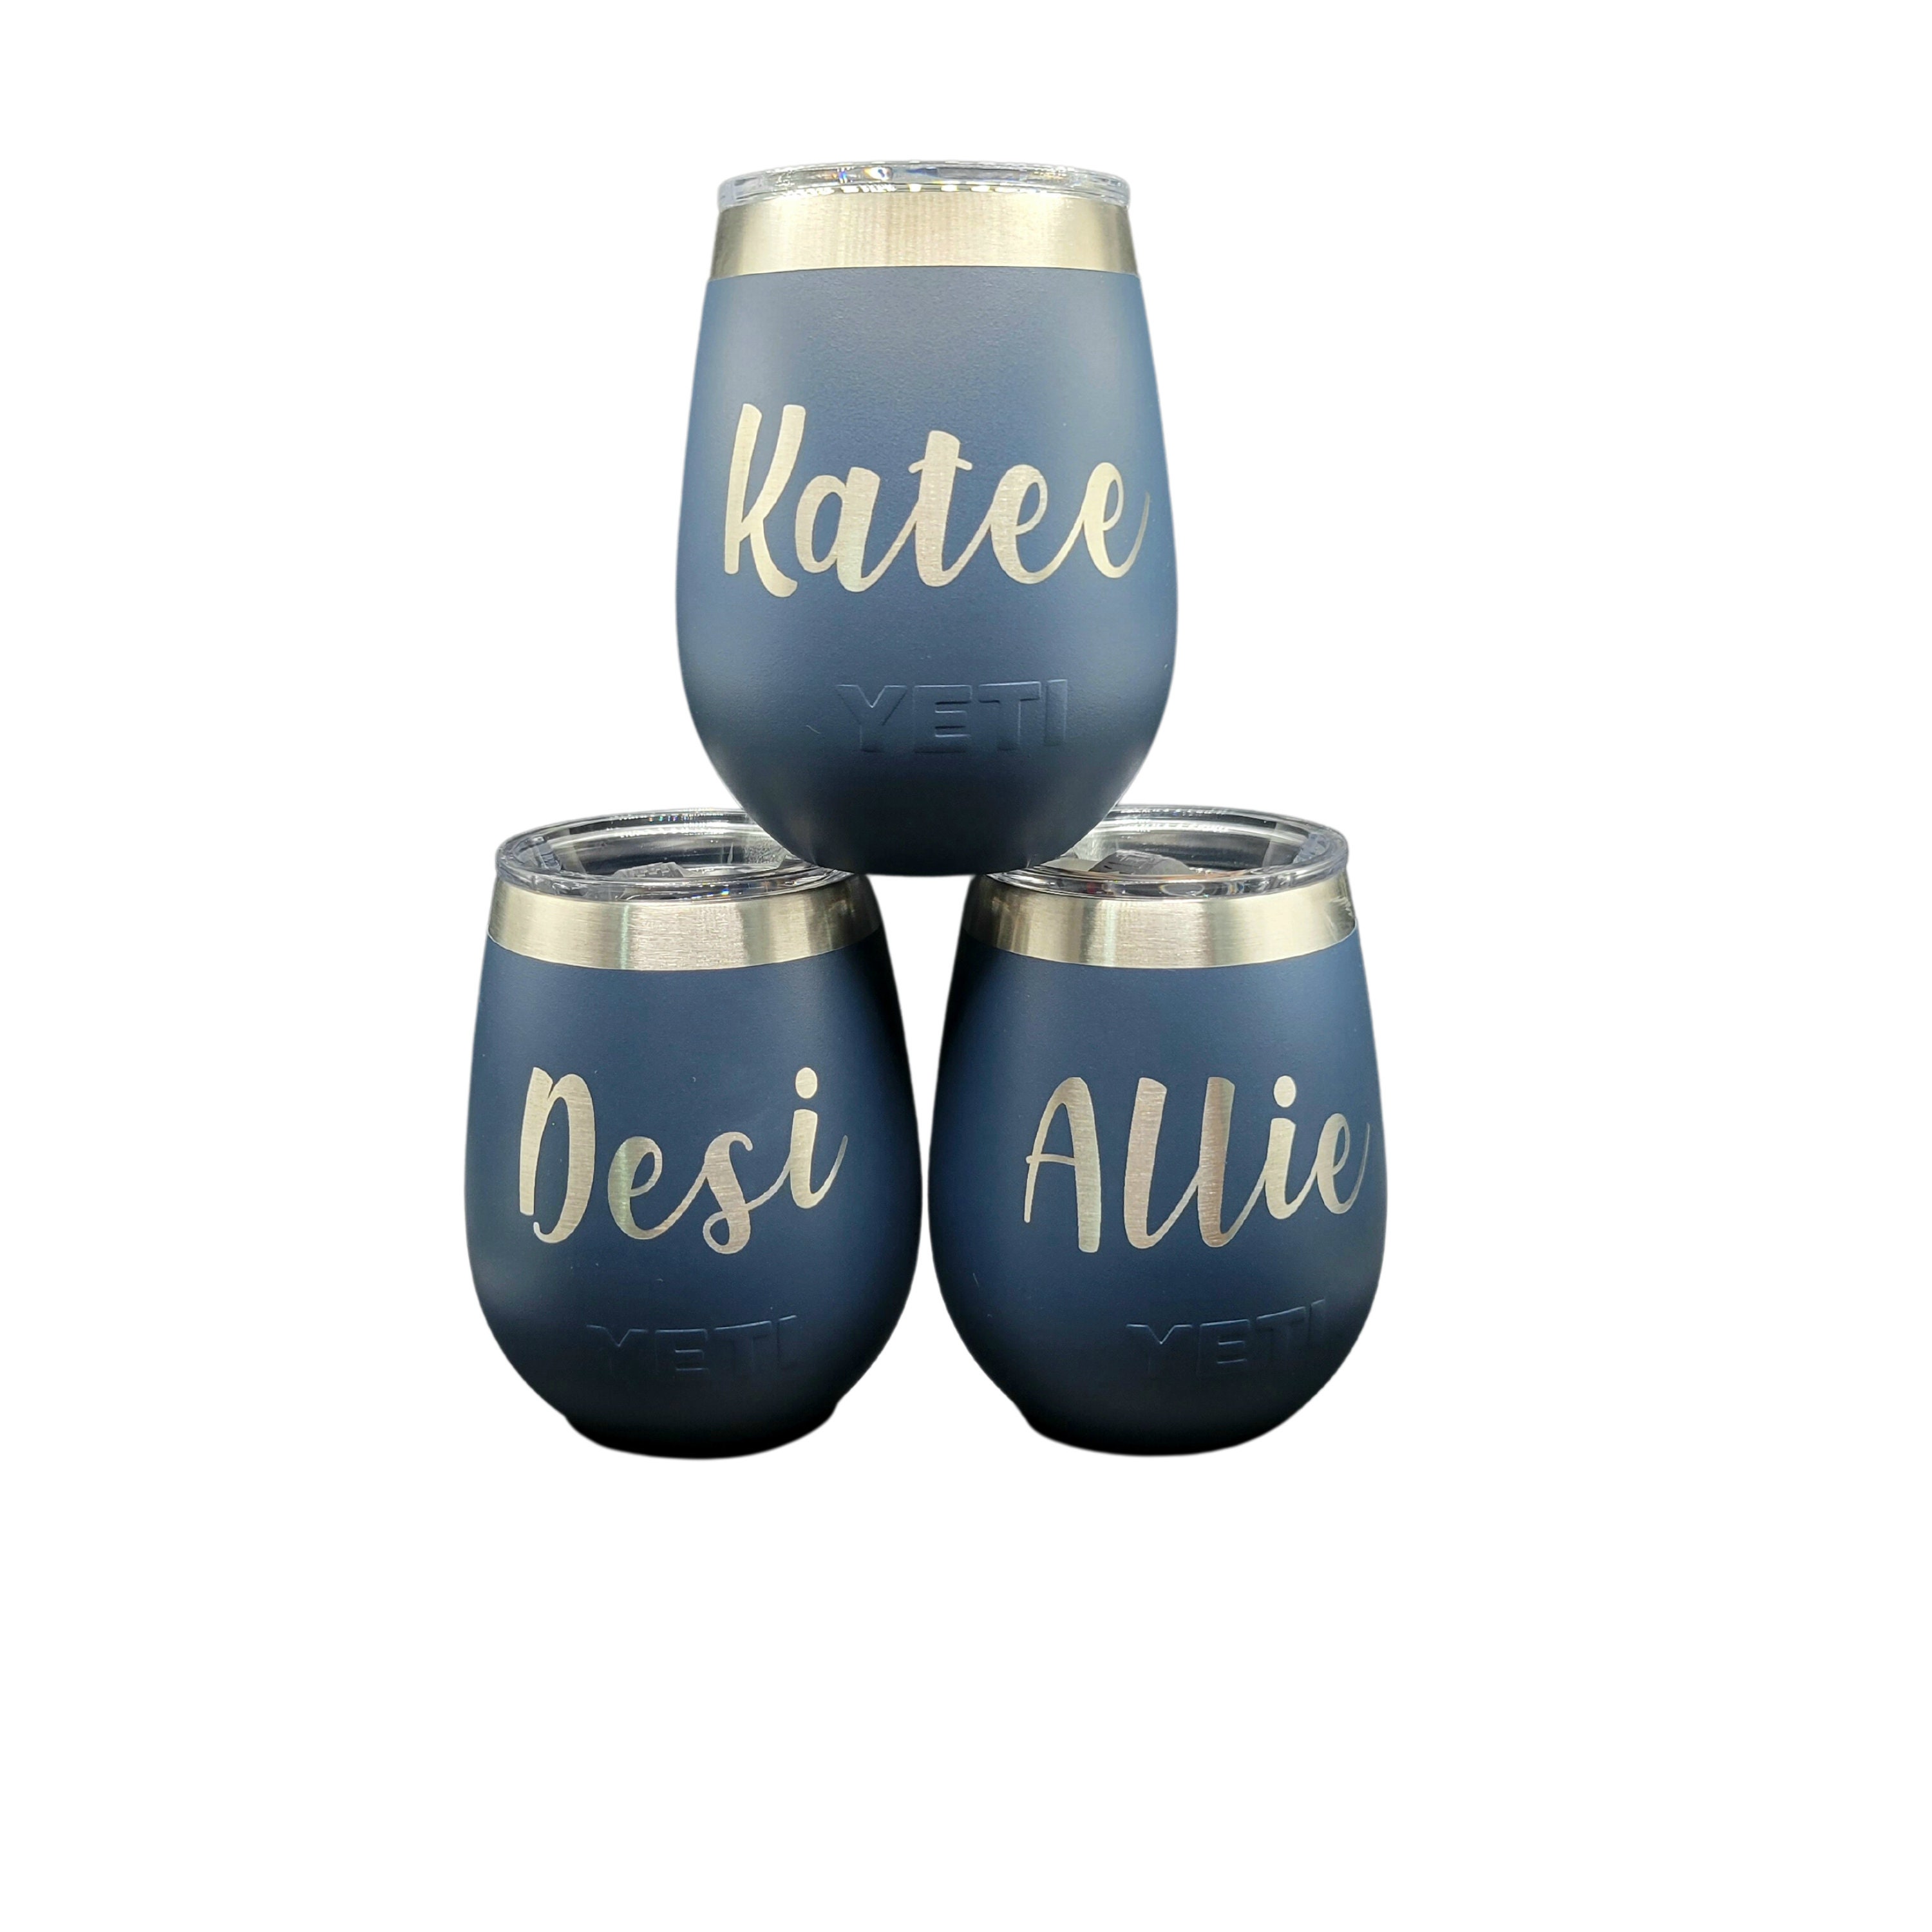 Personalized Yeti Tumbler 10 Oz Wine Cup With Lid Custom Gift for Her or  Wedding Guests Engraved Teacher Appreciation Drinkware 